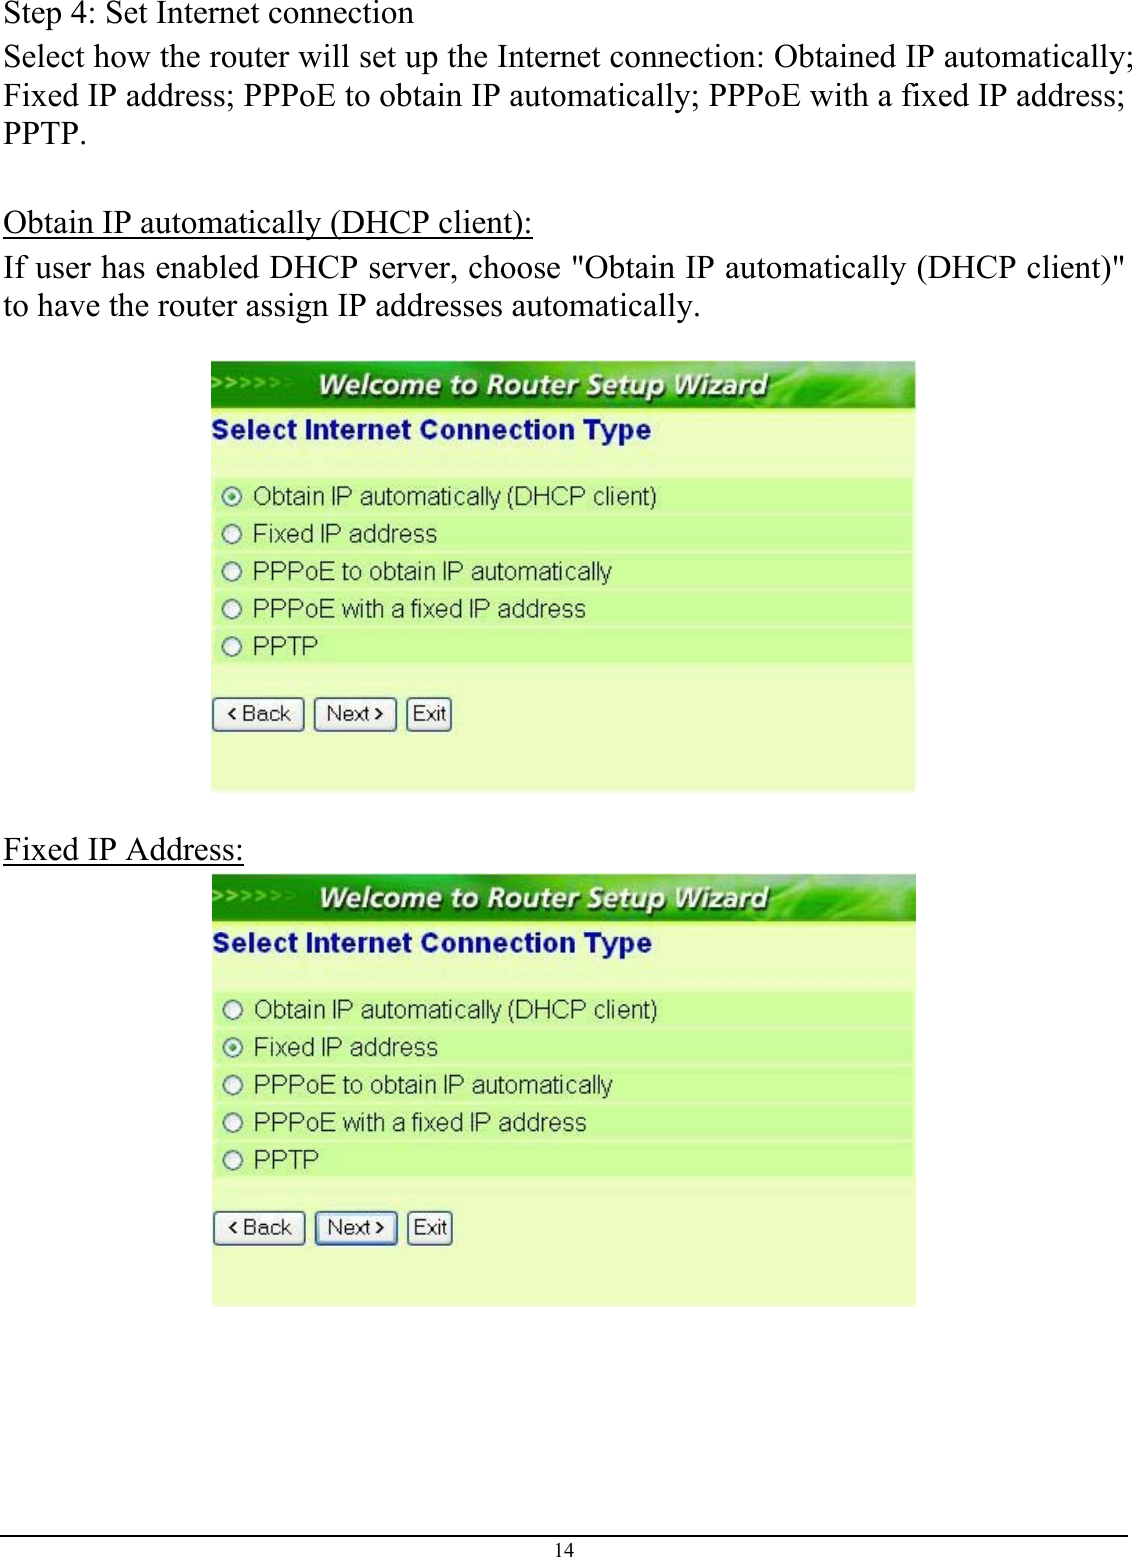 14 Step 4: Set Internet connection Select how the router will set up the Internet connection: Obtained IP automatically; Fixed IP address; PPPoE to obtain IP automatically; PPPoE with a fixed IP address; PPTP.  Obtain IP automatically (DHCP client): If user has enabled DHCP server, choose &quot;Obtain IP automatically (DHCP client)&quot; to have the router assign IP addresses automatically.    Fixed IP Address:  